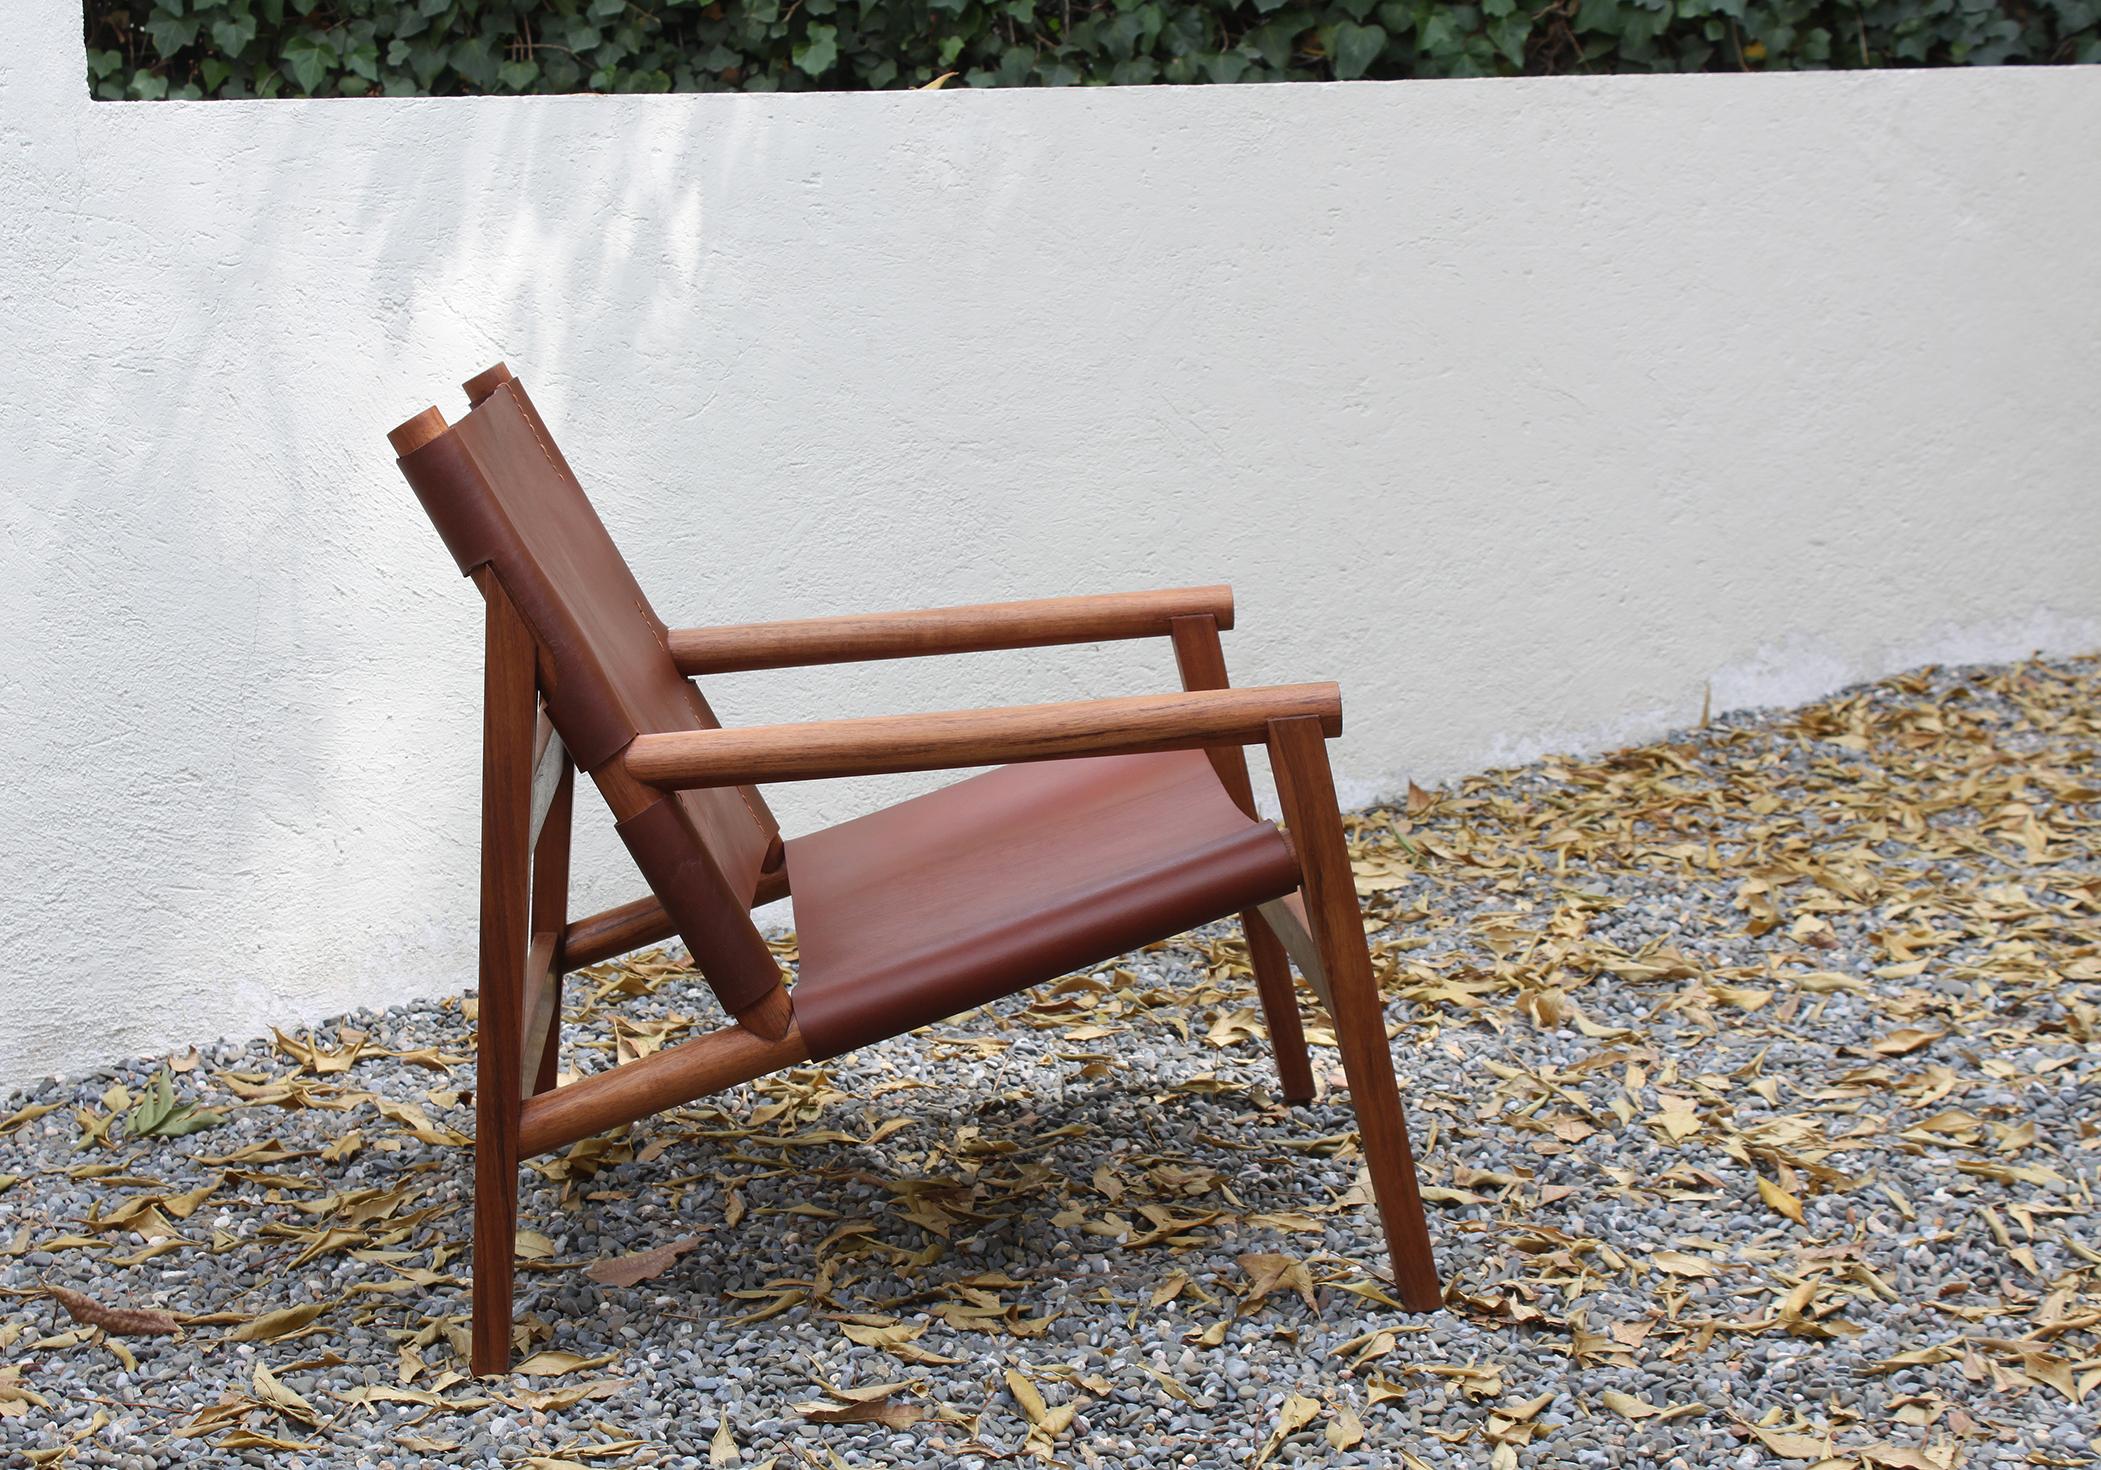 La Colima Chair, Maria Beckmann, Represented by Tuleste Factory 5